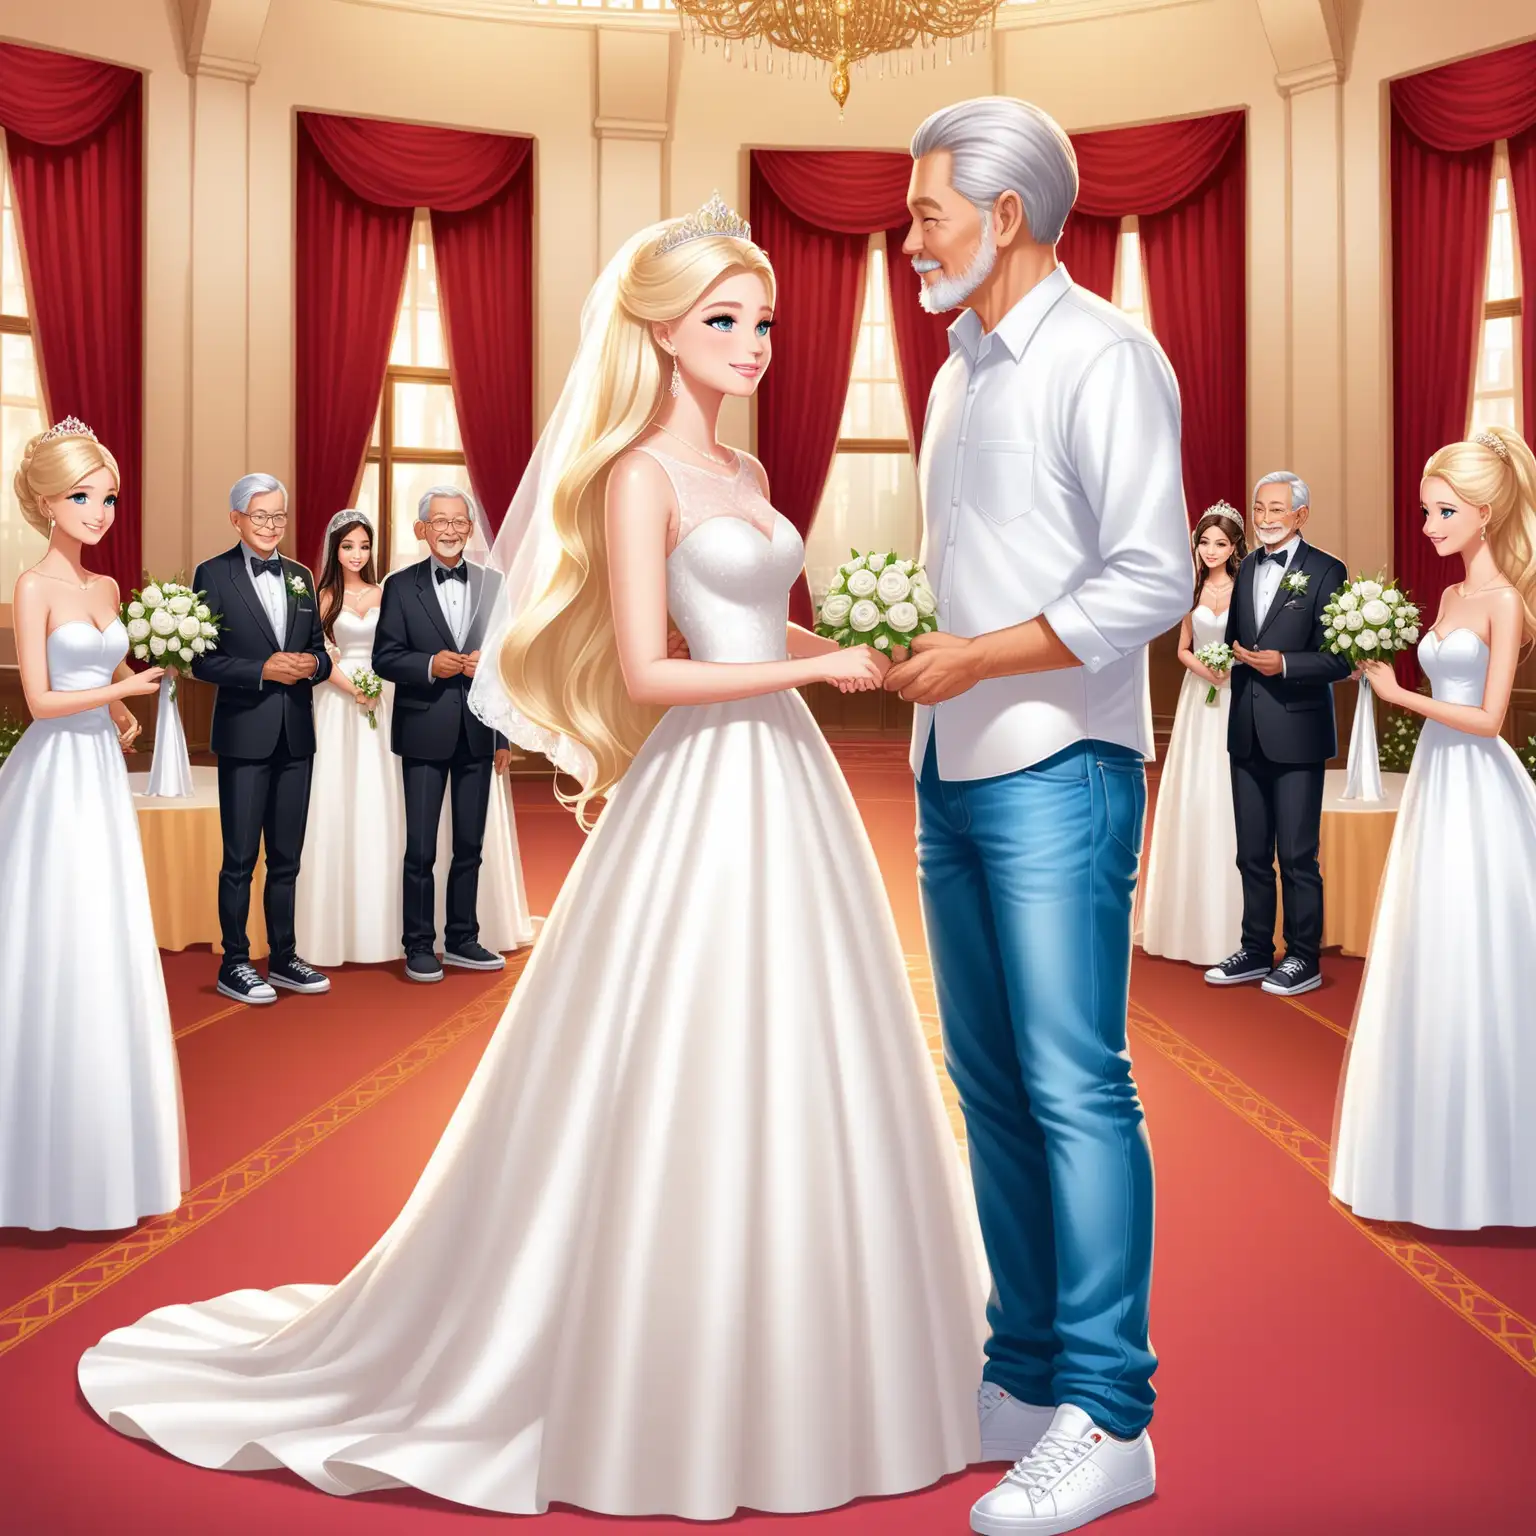 Romantic Wedding Vows at Town Hall Reception Young Barbie Bride and Elderly Andean Groom